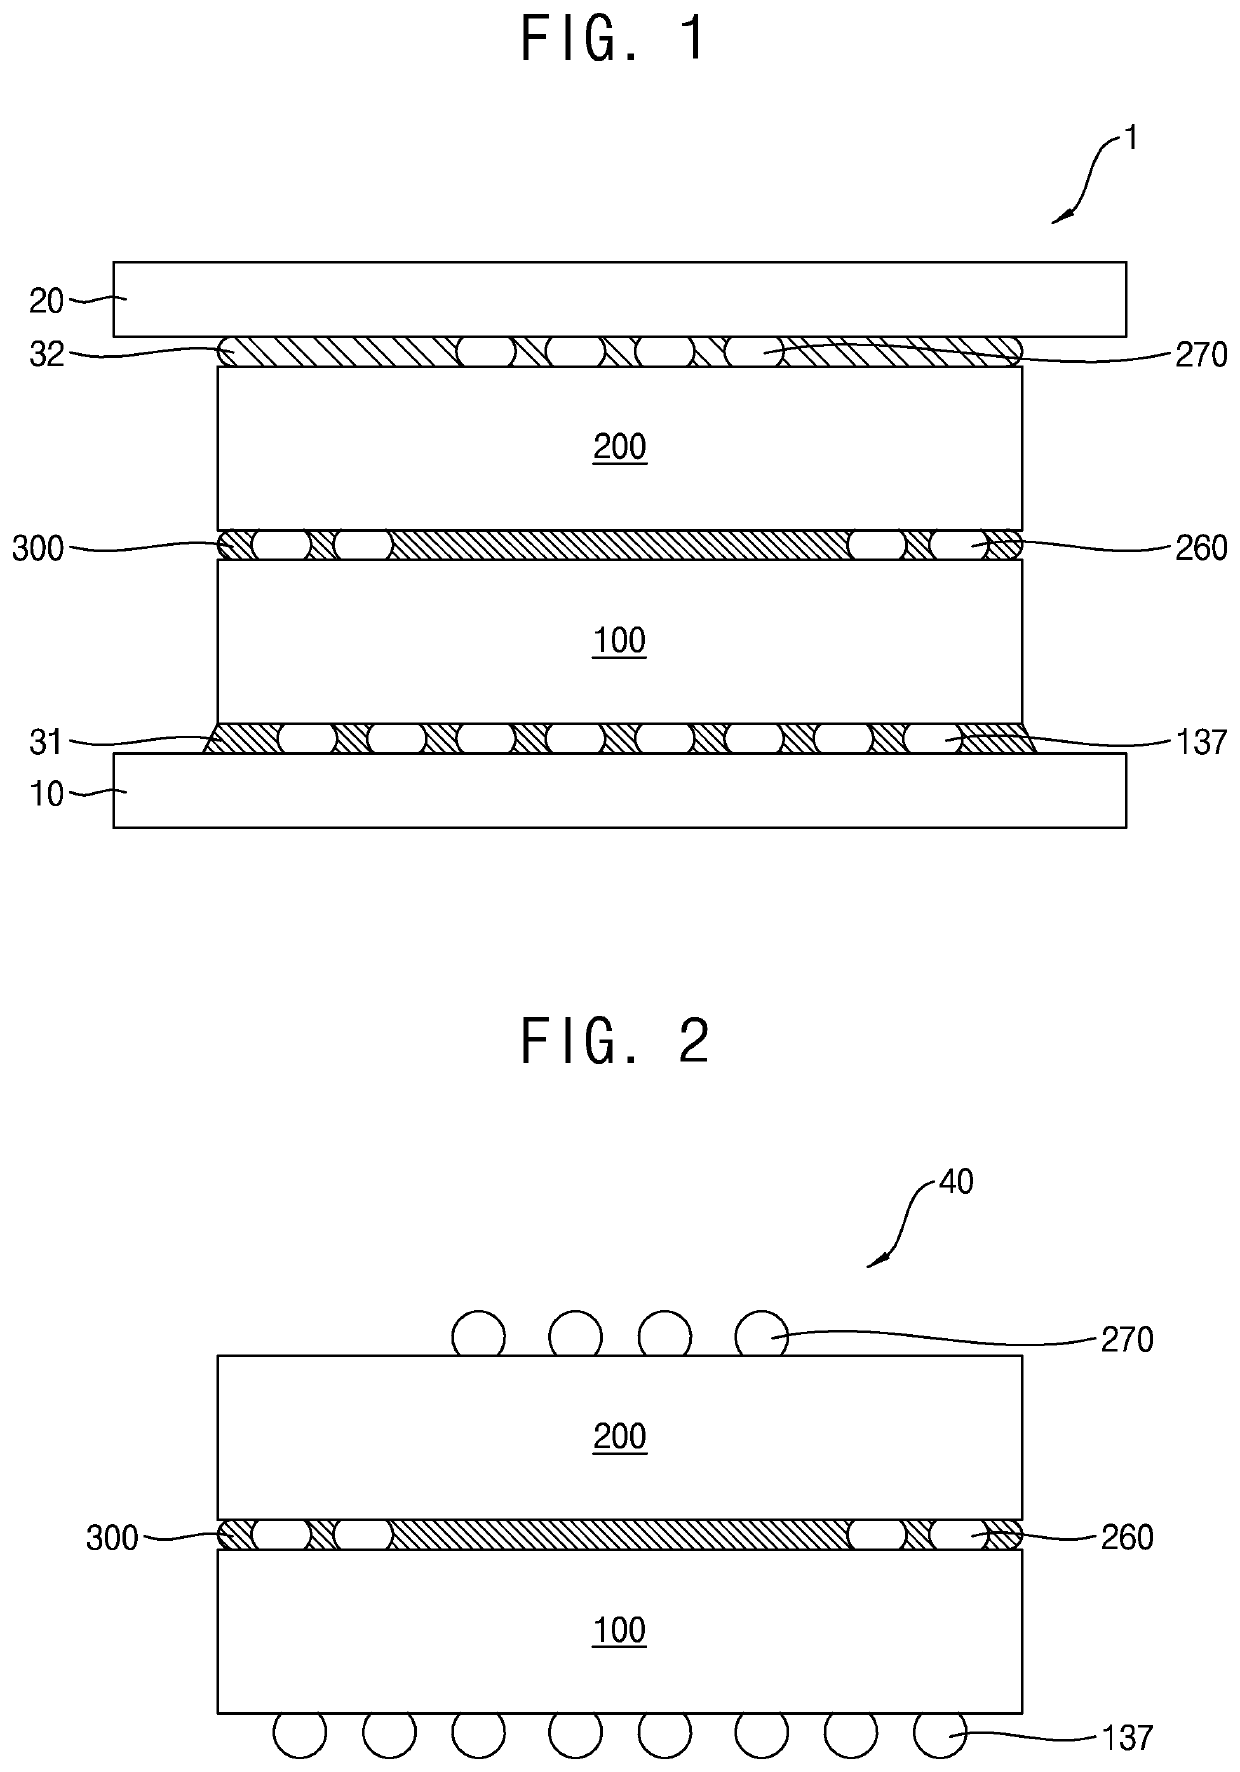 Semiconductor packages having package-on-package (POP) structures